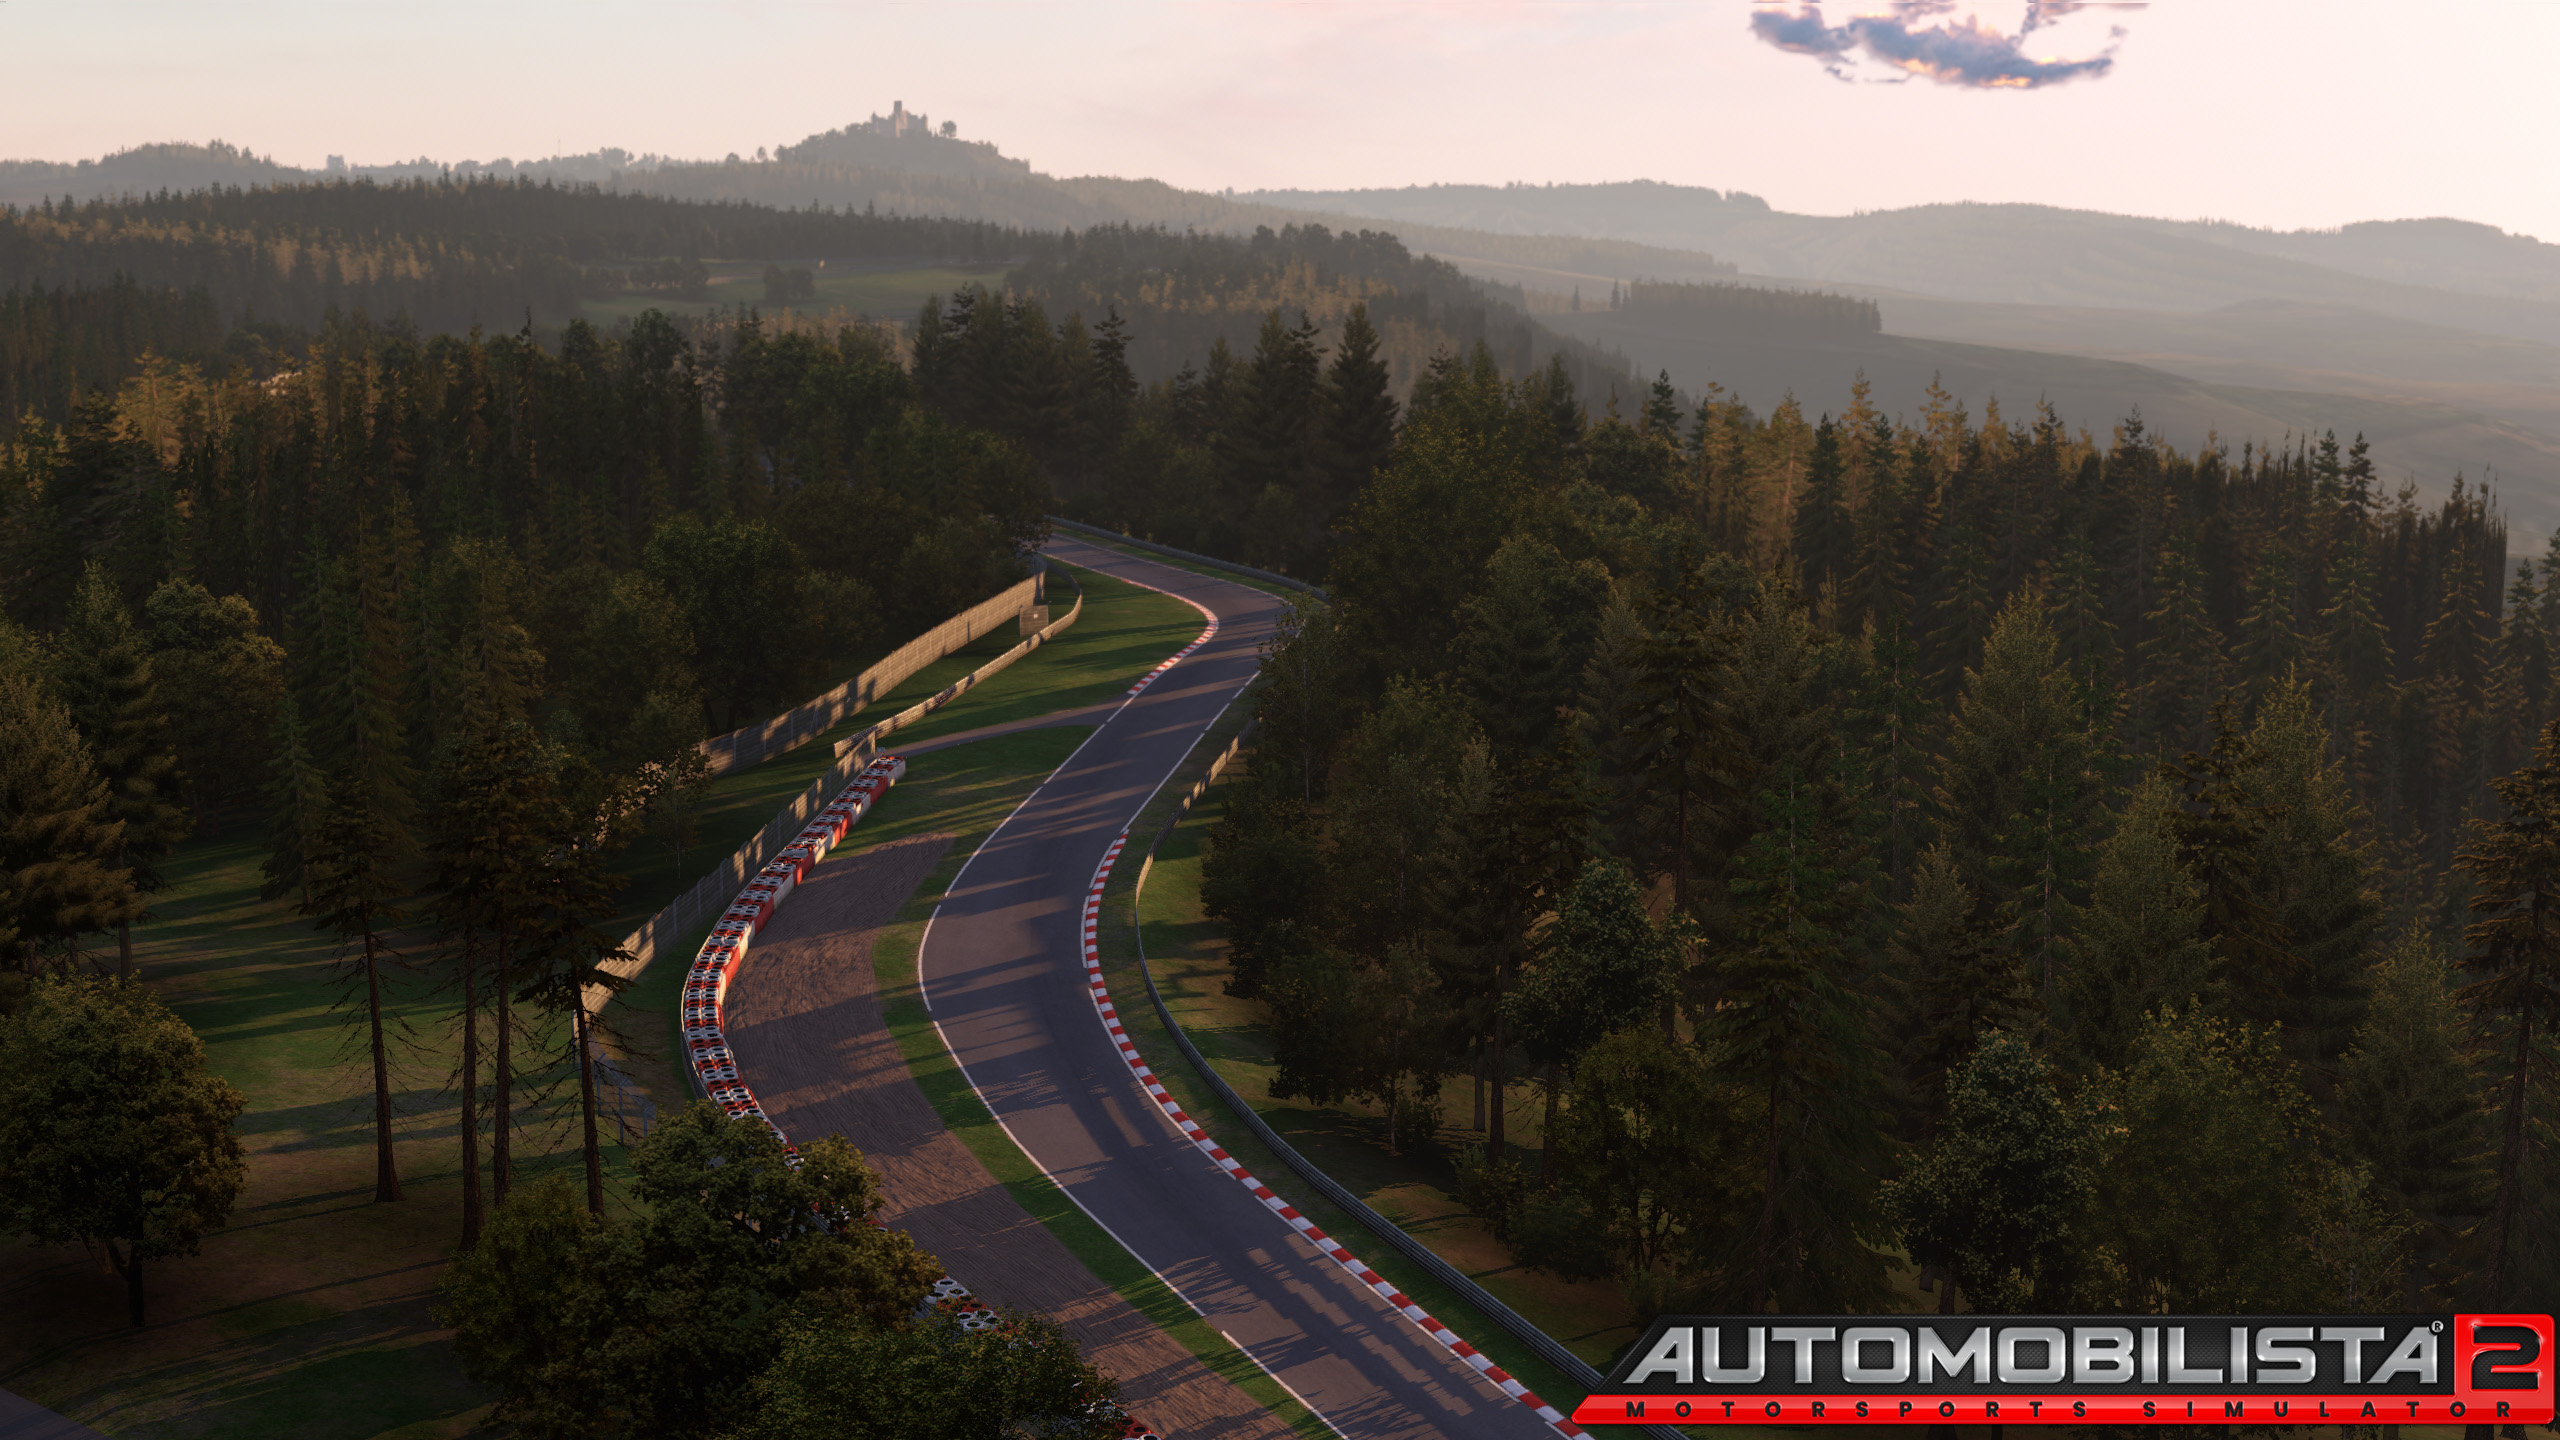 More information about "Automobilista 2: update e Nurburgring Nordschleife disponibili"